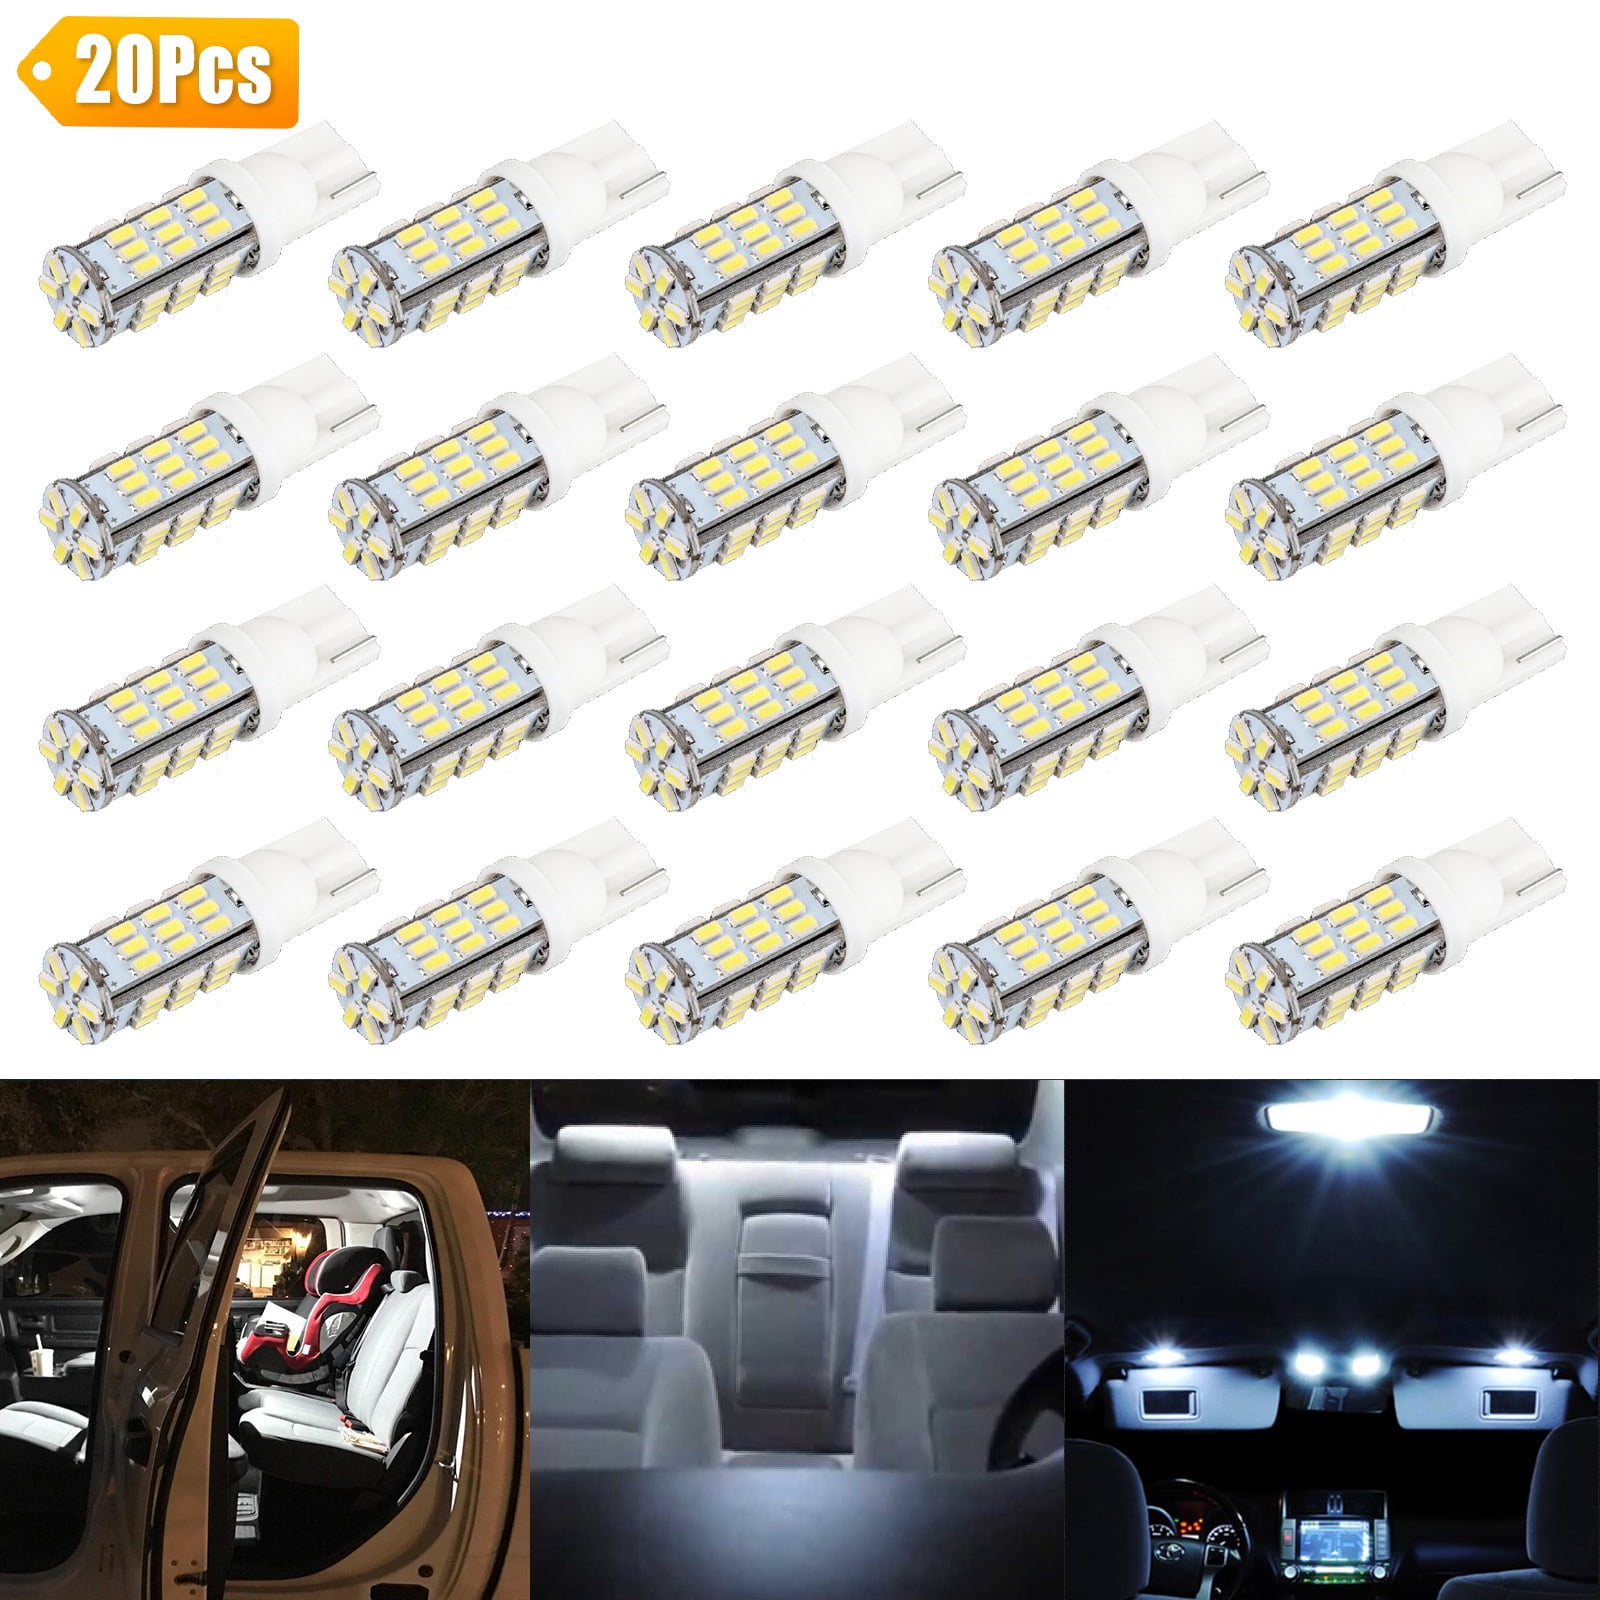 20x 12V T10 5050 5SMD Red LED Car Wedge instrument Light Bulbs Super Bright Lamp 